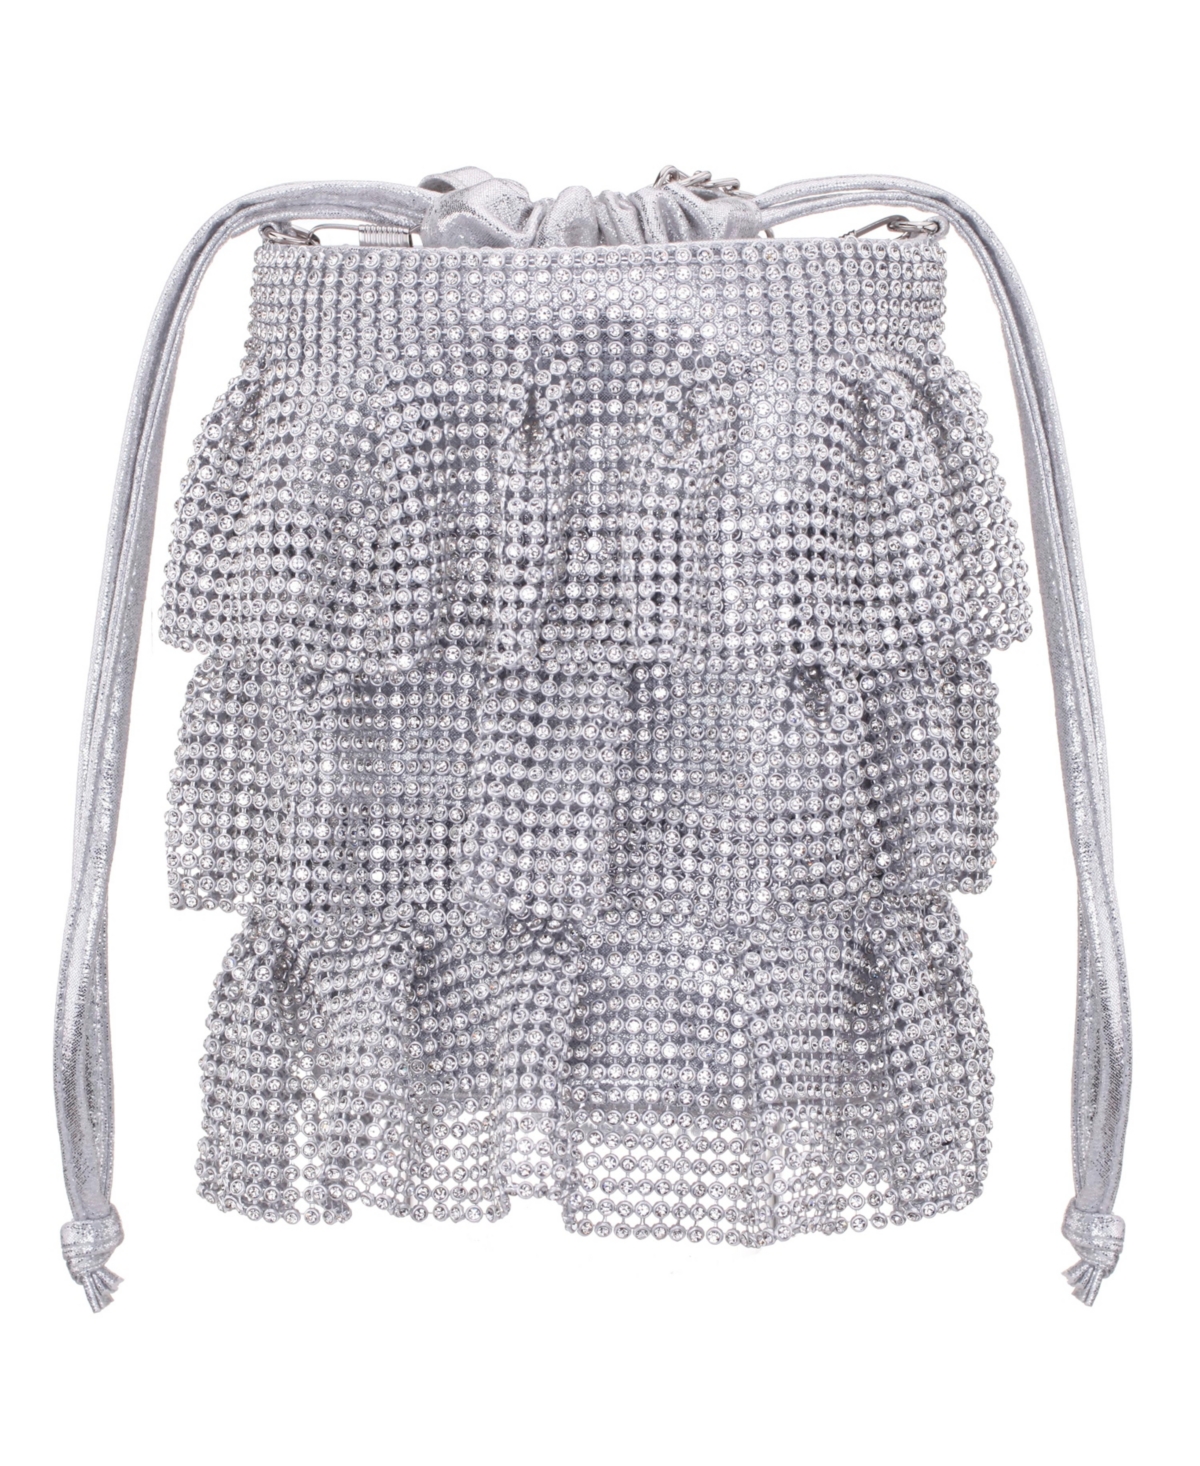 4 Tired crystal mesh pouch bag - Silver